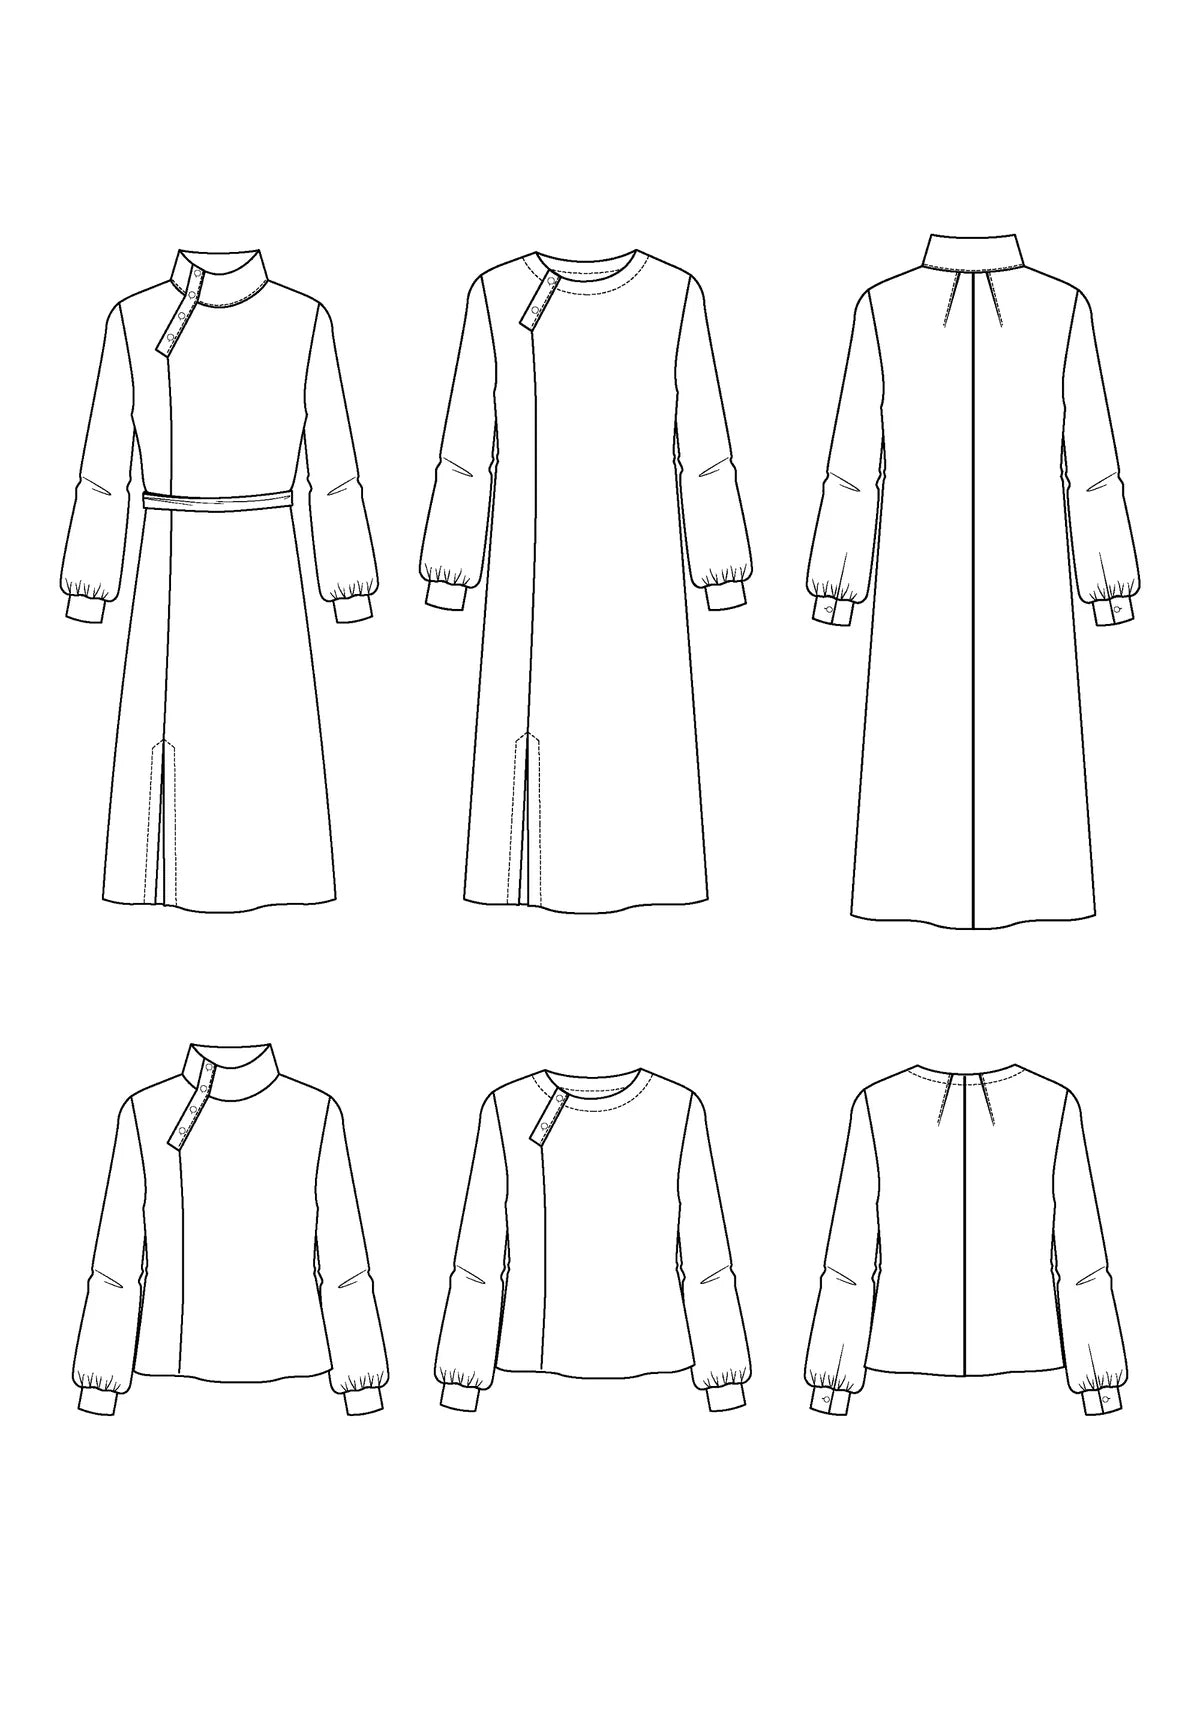 Maison Fauve - Soliflore Dress and Blouse Sewing Pattern